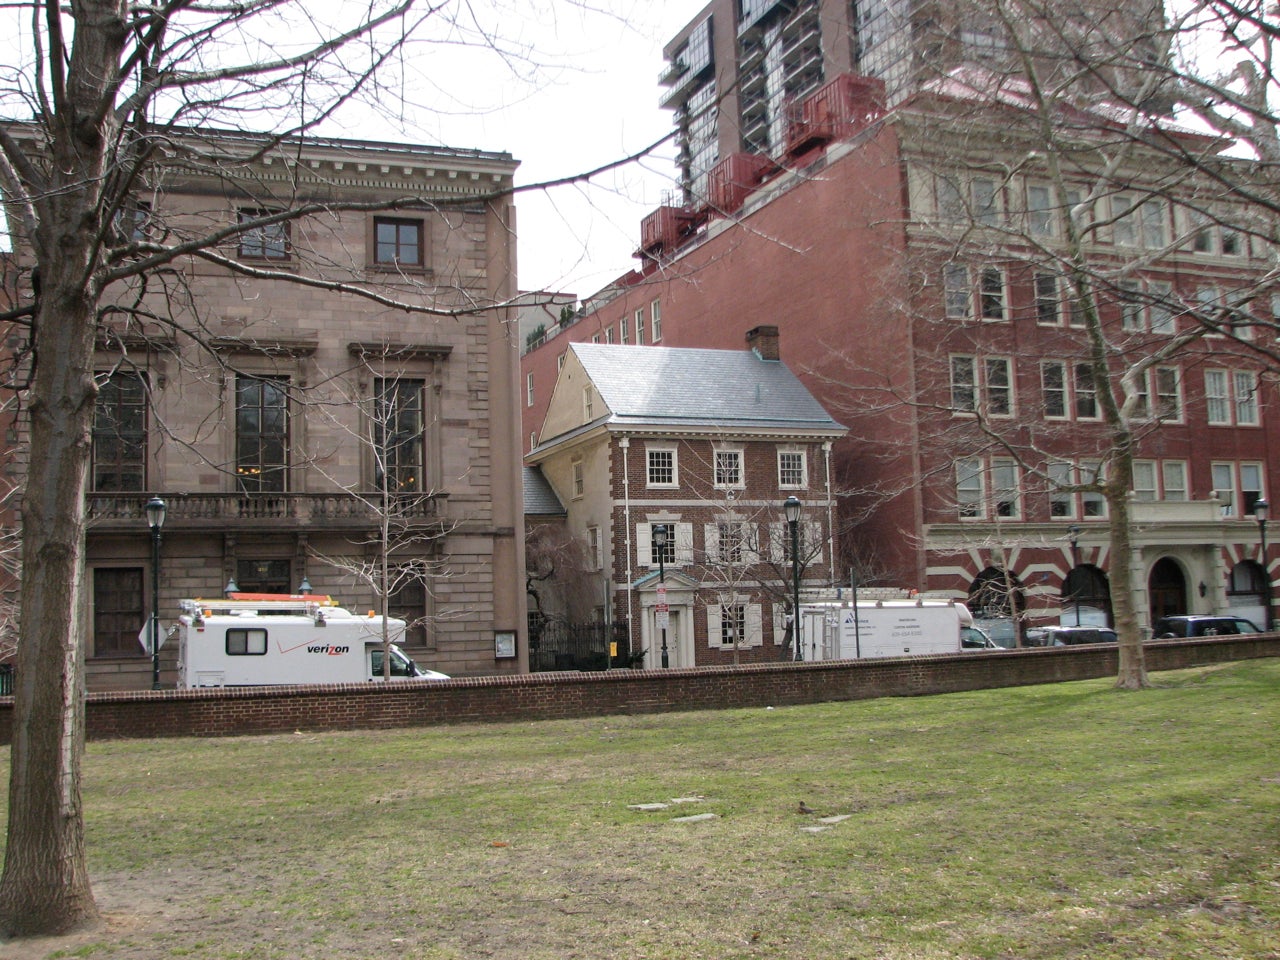 Update: L&I Board of Review rejects Dilworth House project